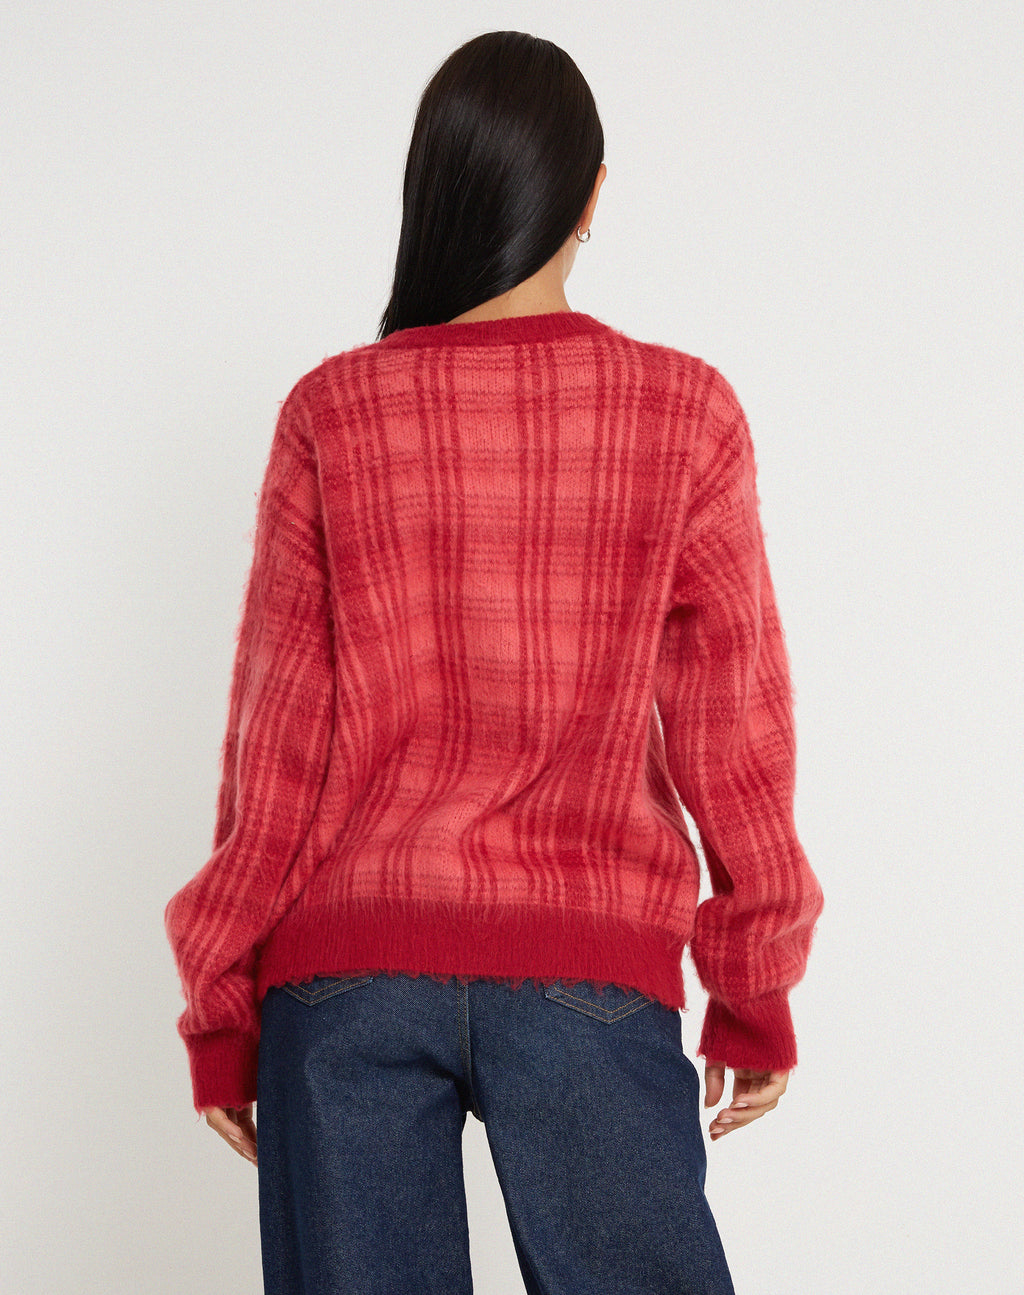 Mihail Knitted Jumper in Red and Pink